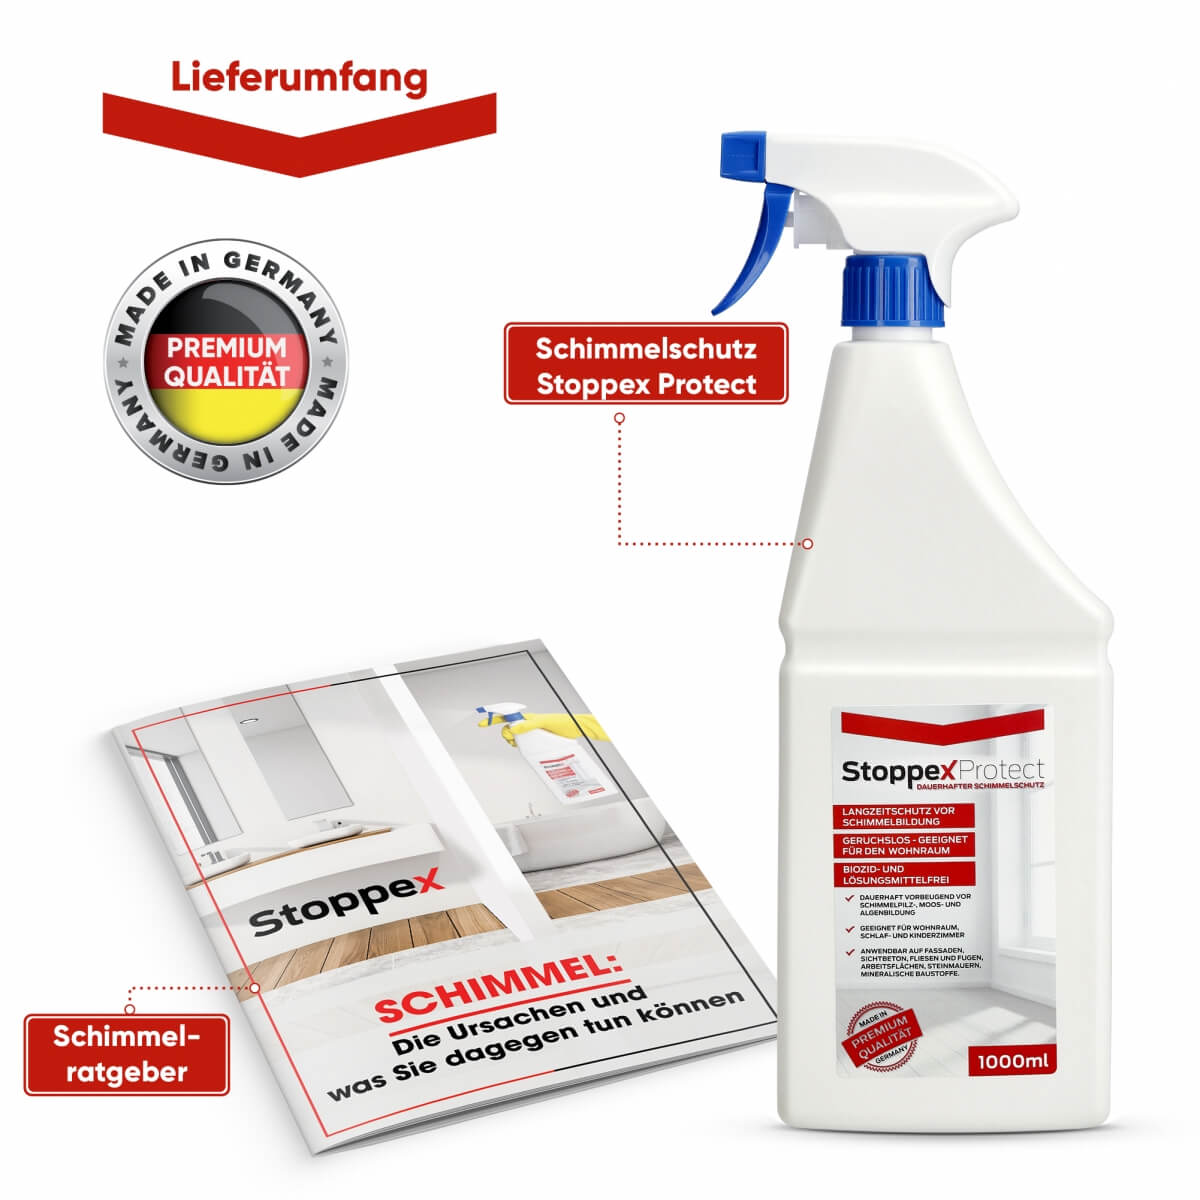 Lieferumfang Stoppex Protect